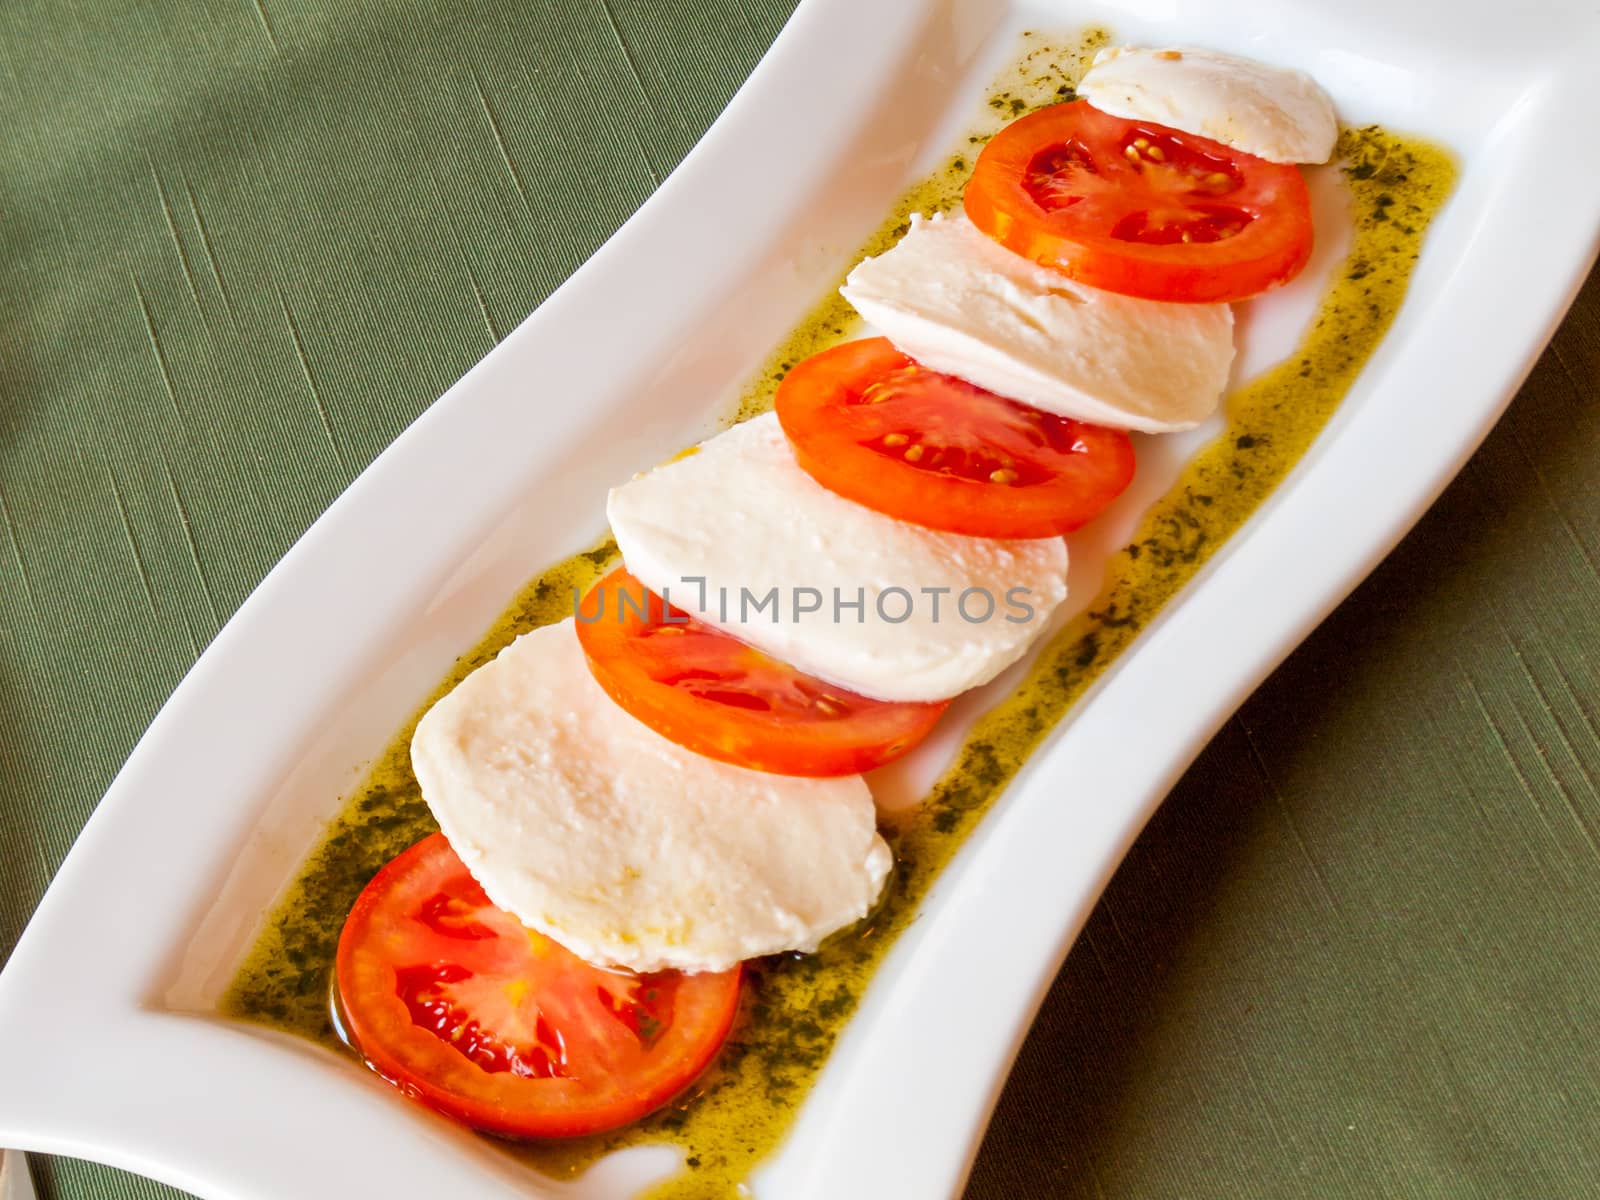 Summer Classic Italian salad. Salad of red juicy tomatoes, fresh and soft mozzarella cheese and sauce